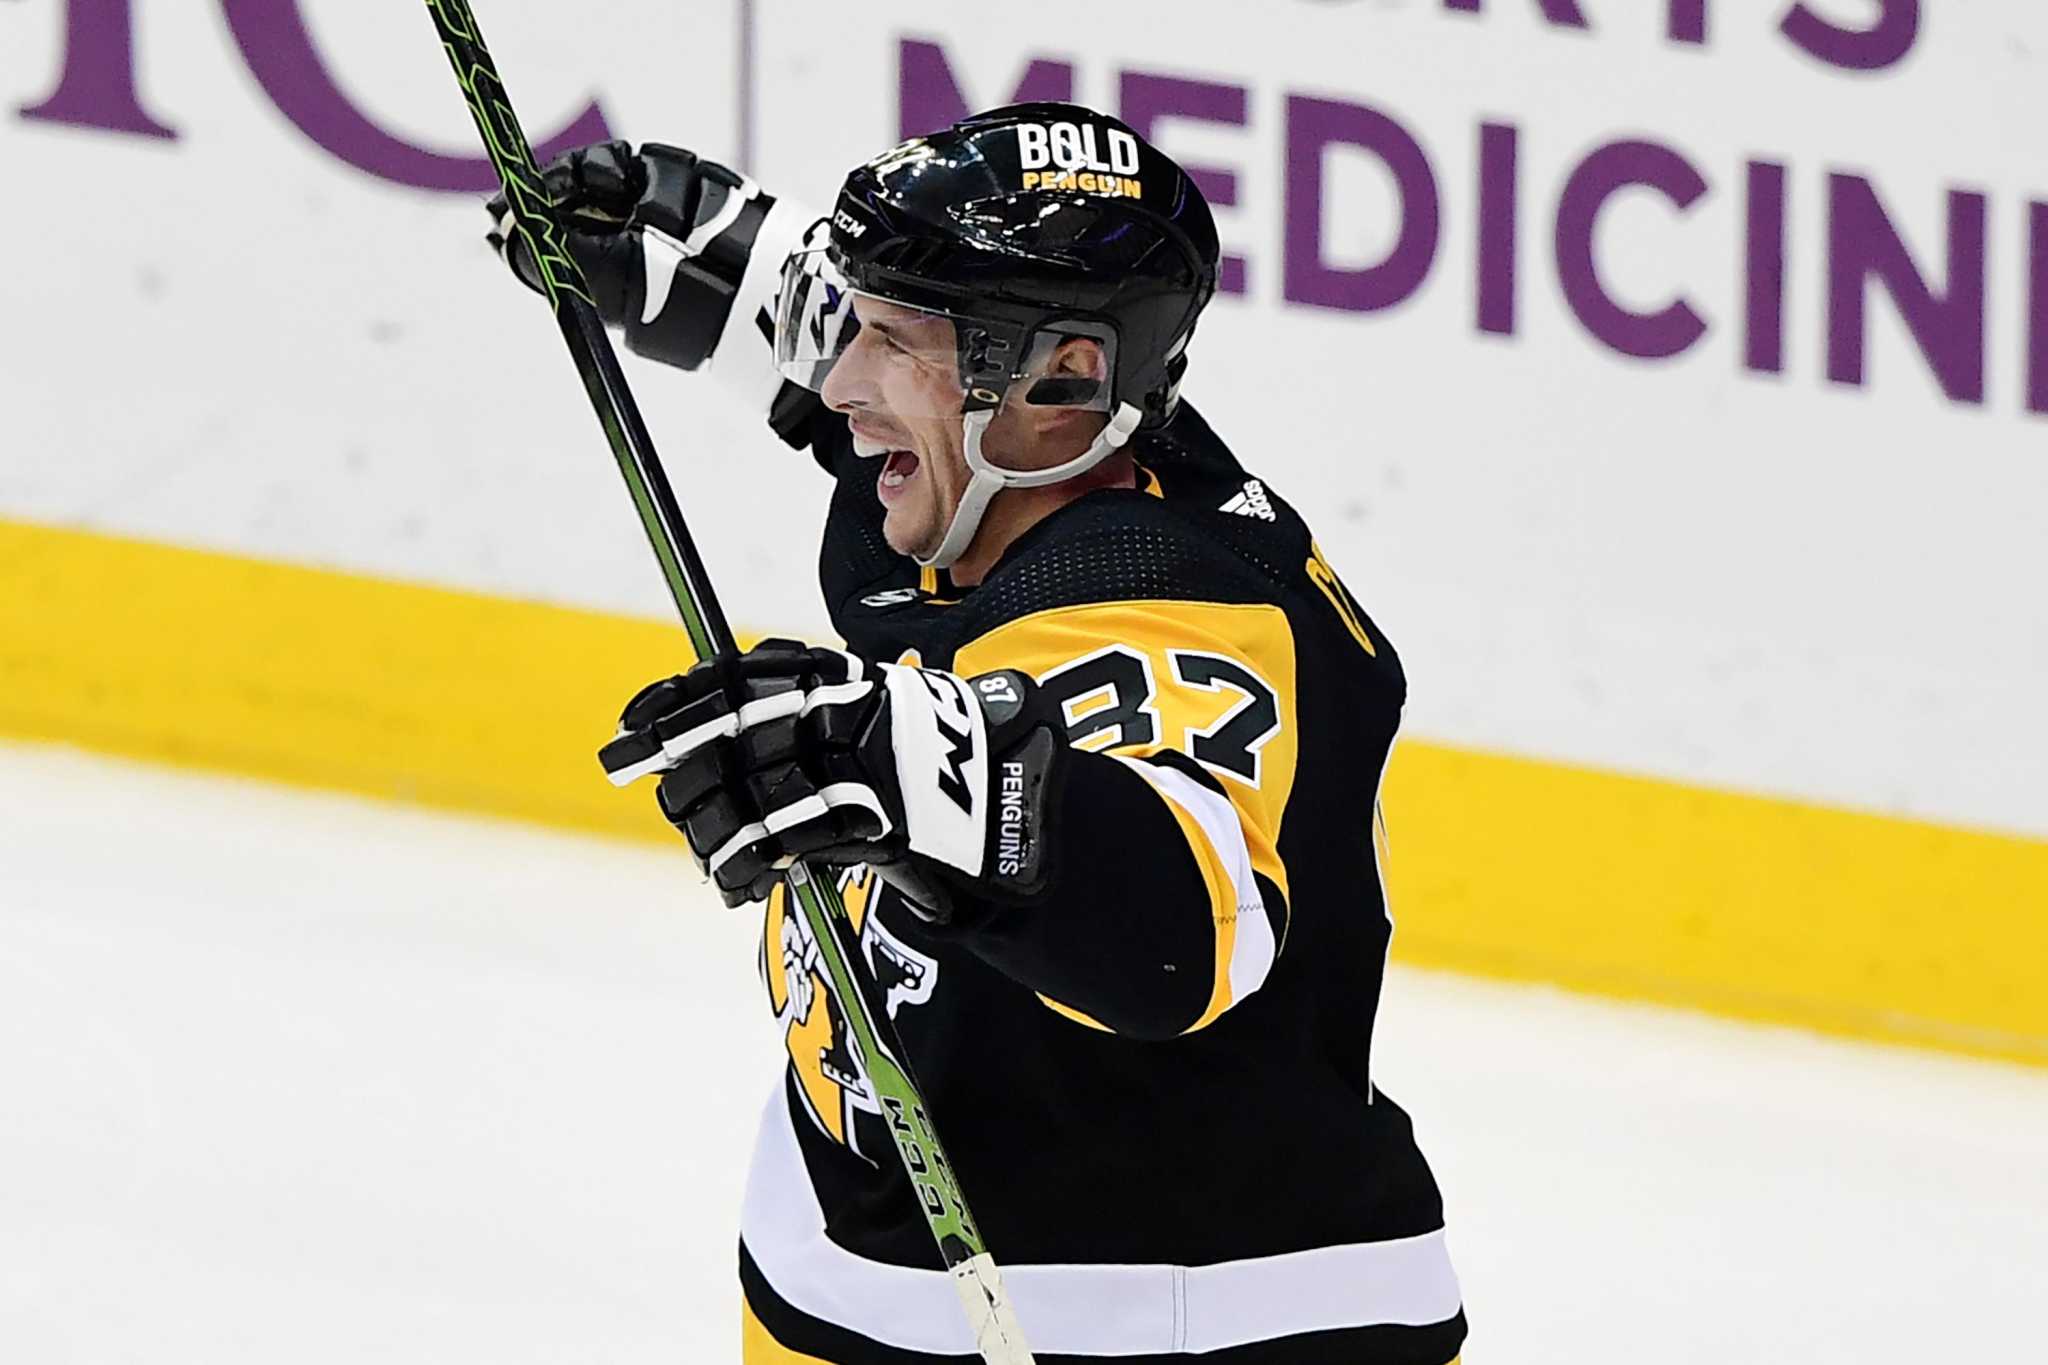 Crosby scores in overtime, Penguins beat Rangers 5-4, Taiwan News